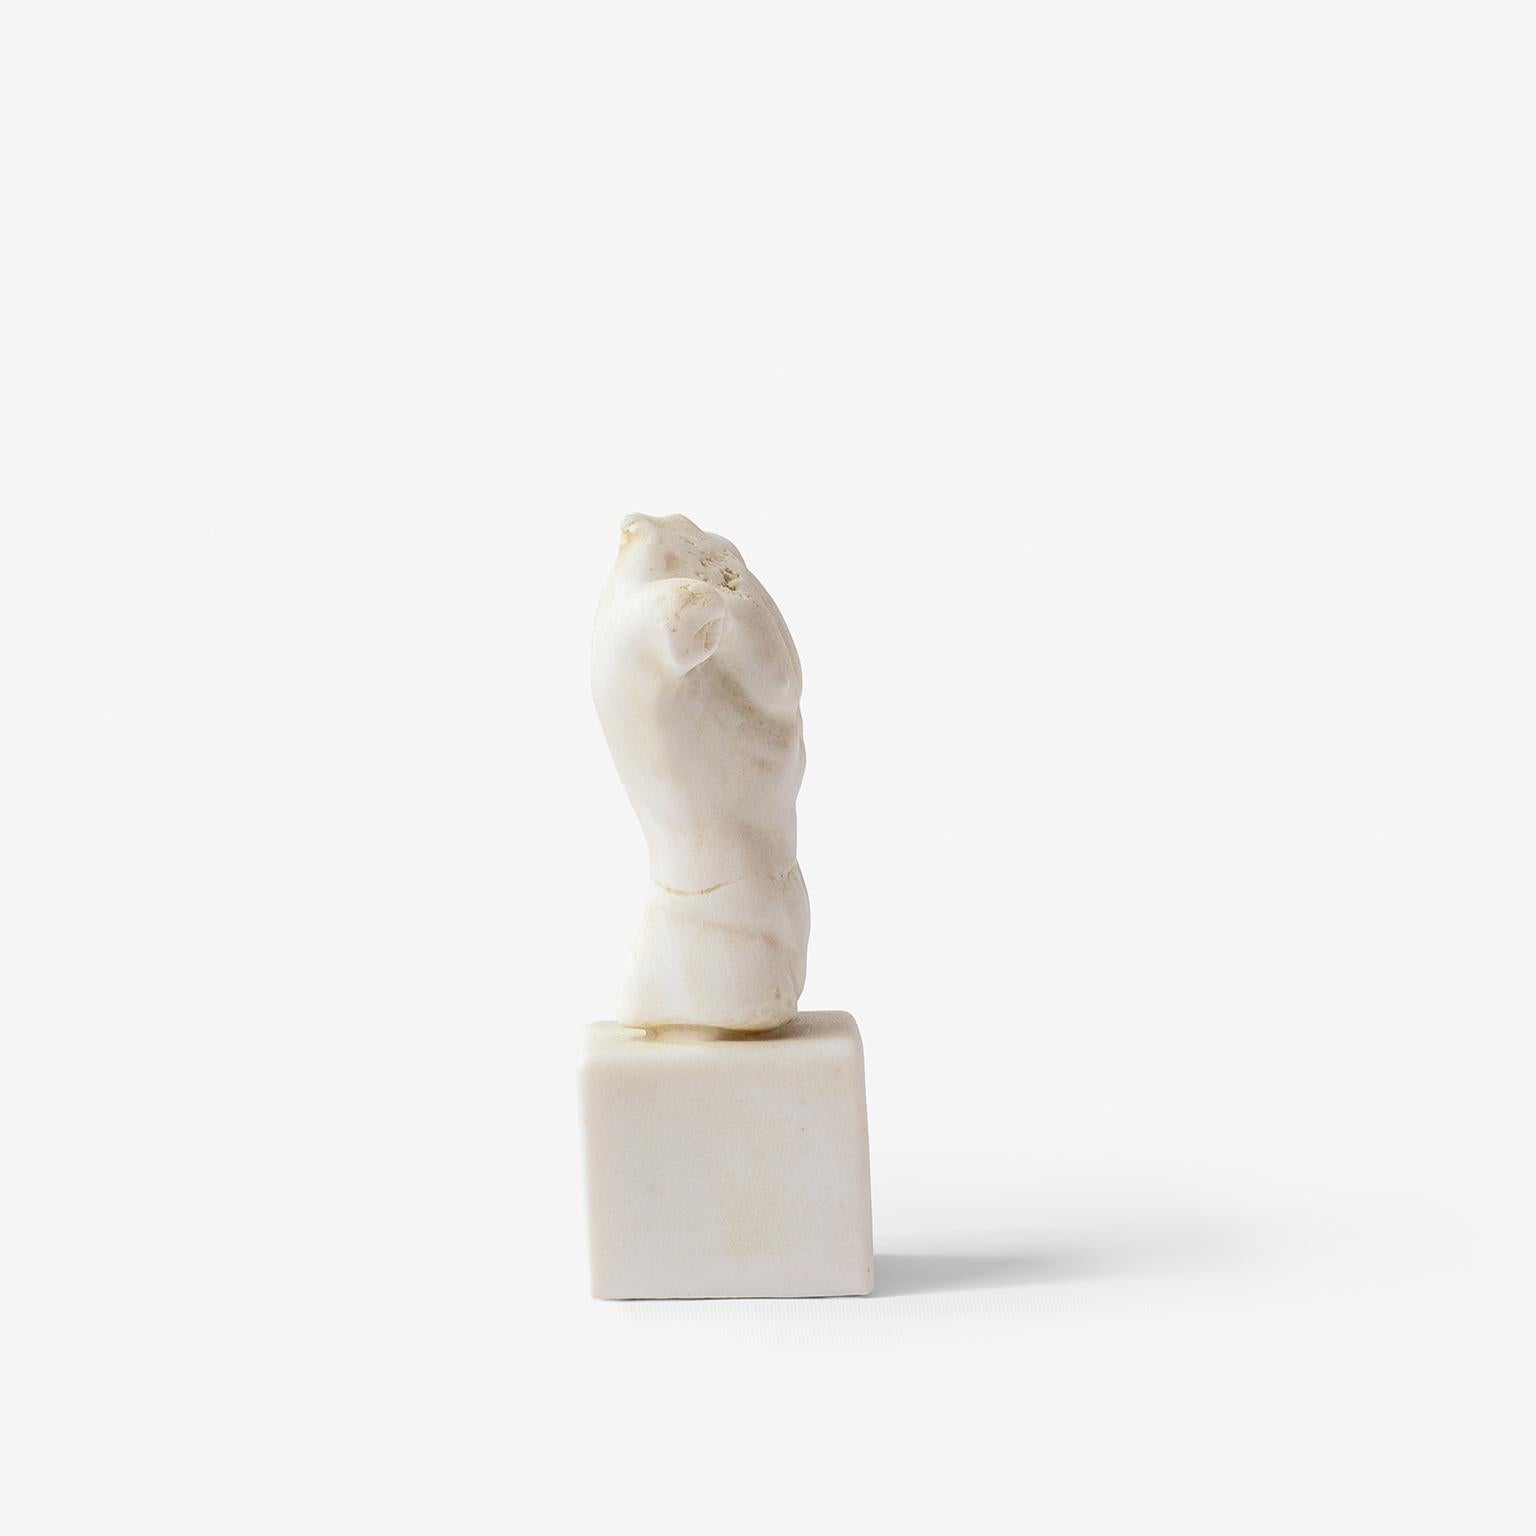 Height: 5.9'' / Weight: 800 gr

This is a work that symbolizes the depiction of the ideal male form.

-Produced from pressed marble powder.
-Produced from the original molds of the works from the museum.
-Can be used indoors and outdoors.

